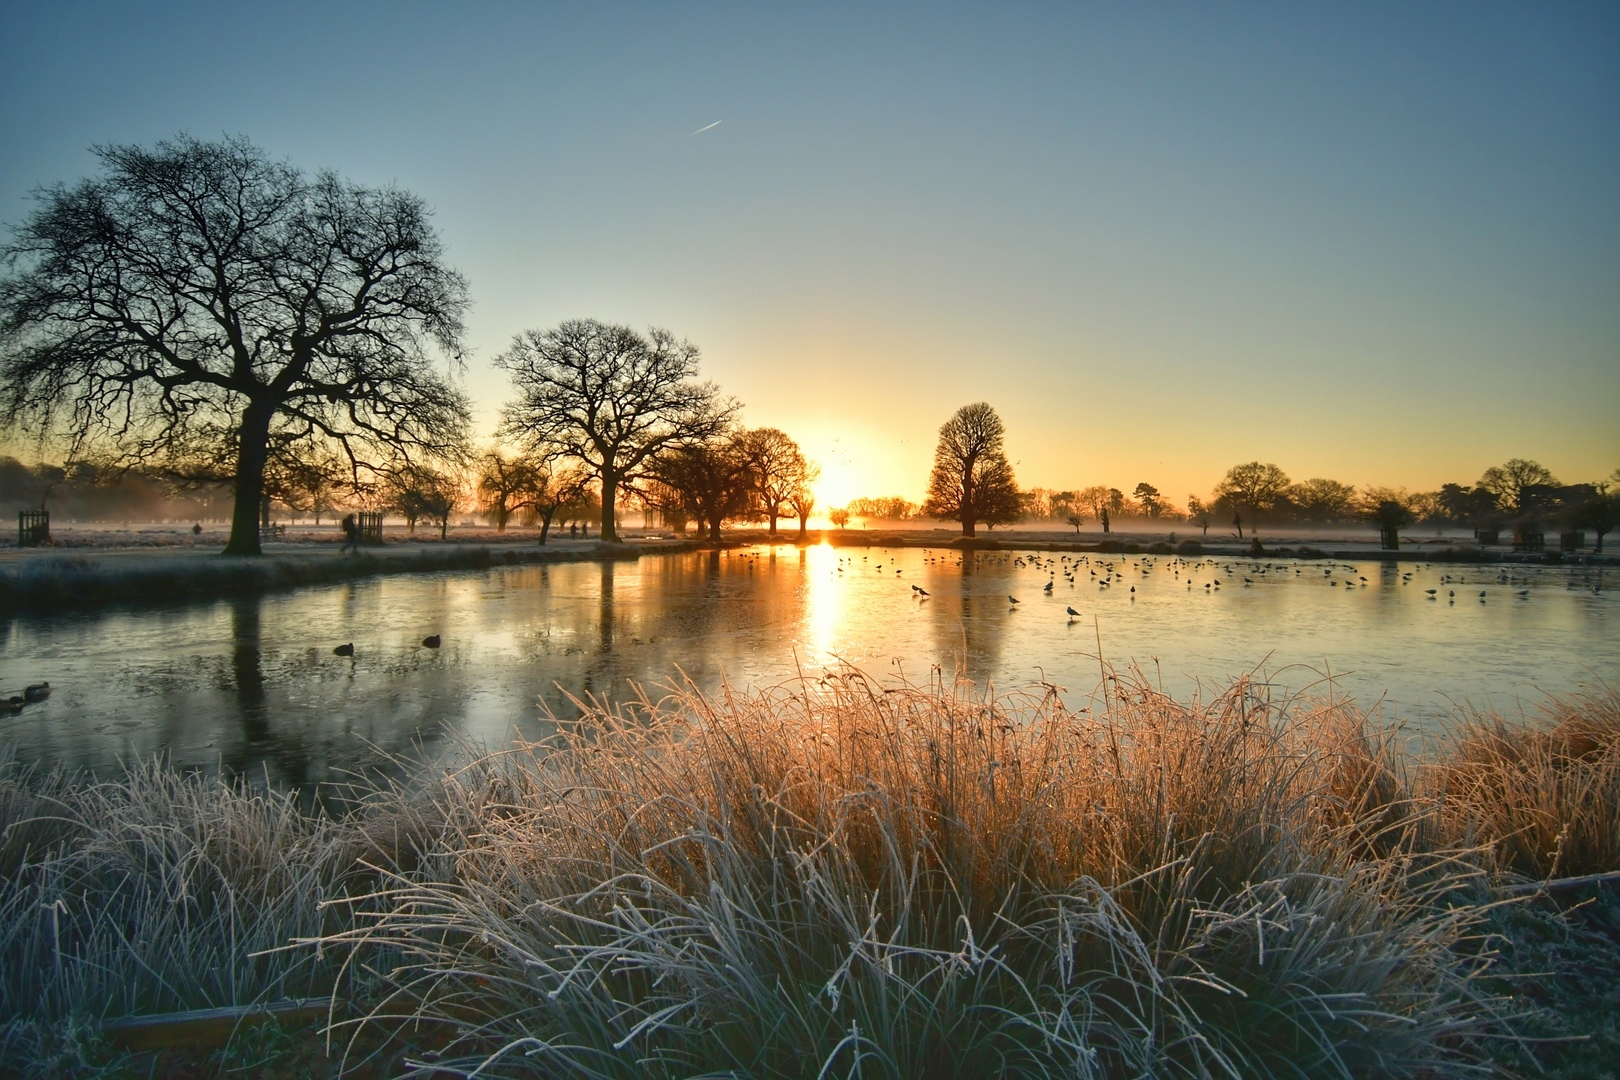 Winter tree identification with The Royal Parks, Virtual Event, United Kingdom